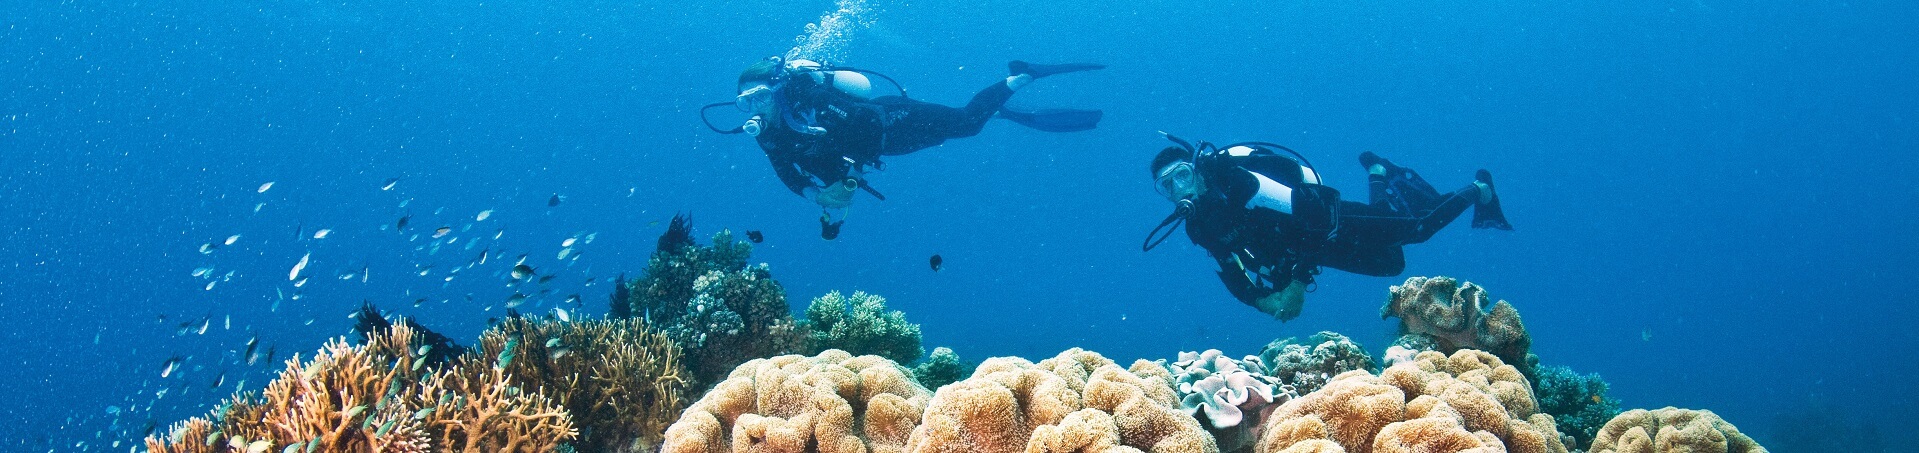 Can non-swimmers do scuba diving in the Great Barrier Reef?